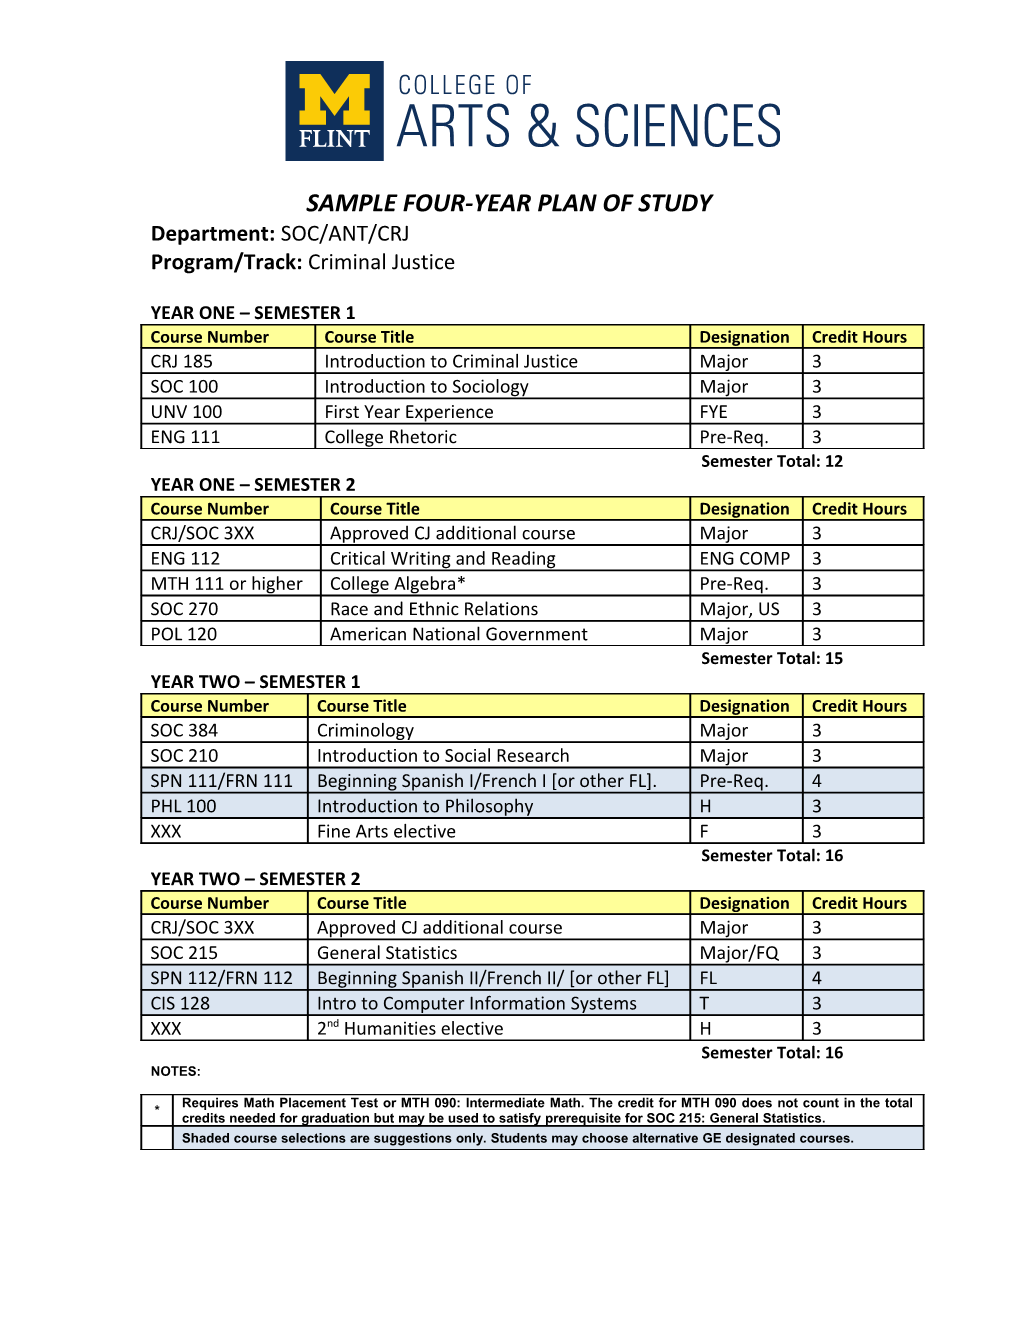 Sample Four-Year Plan of Study